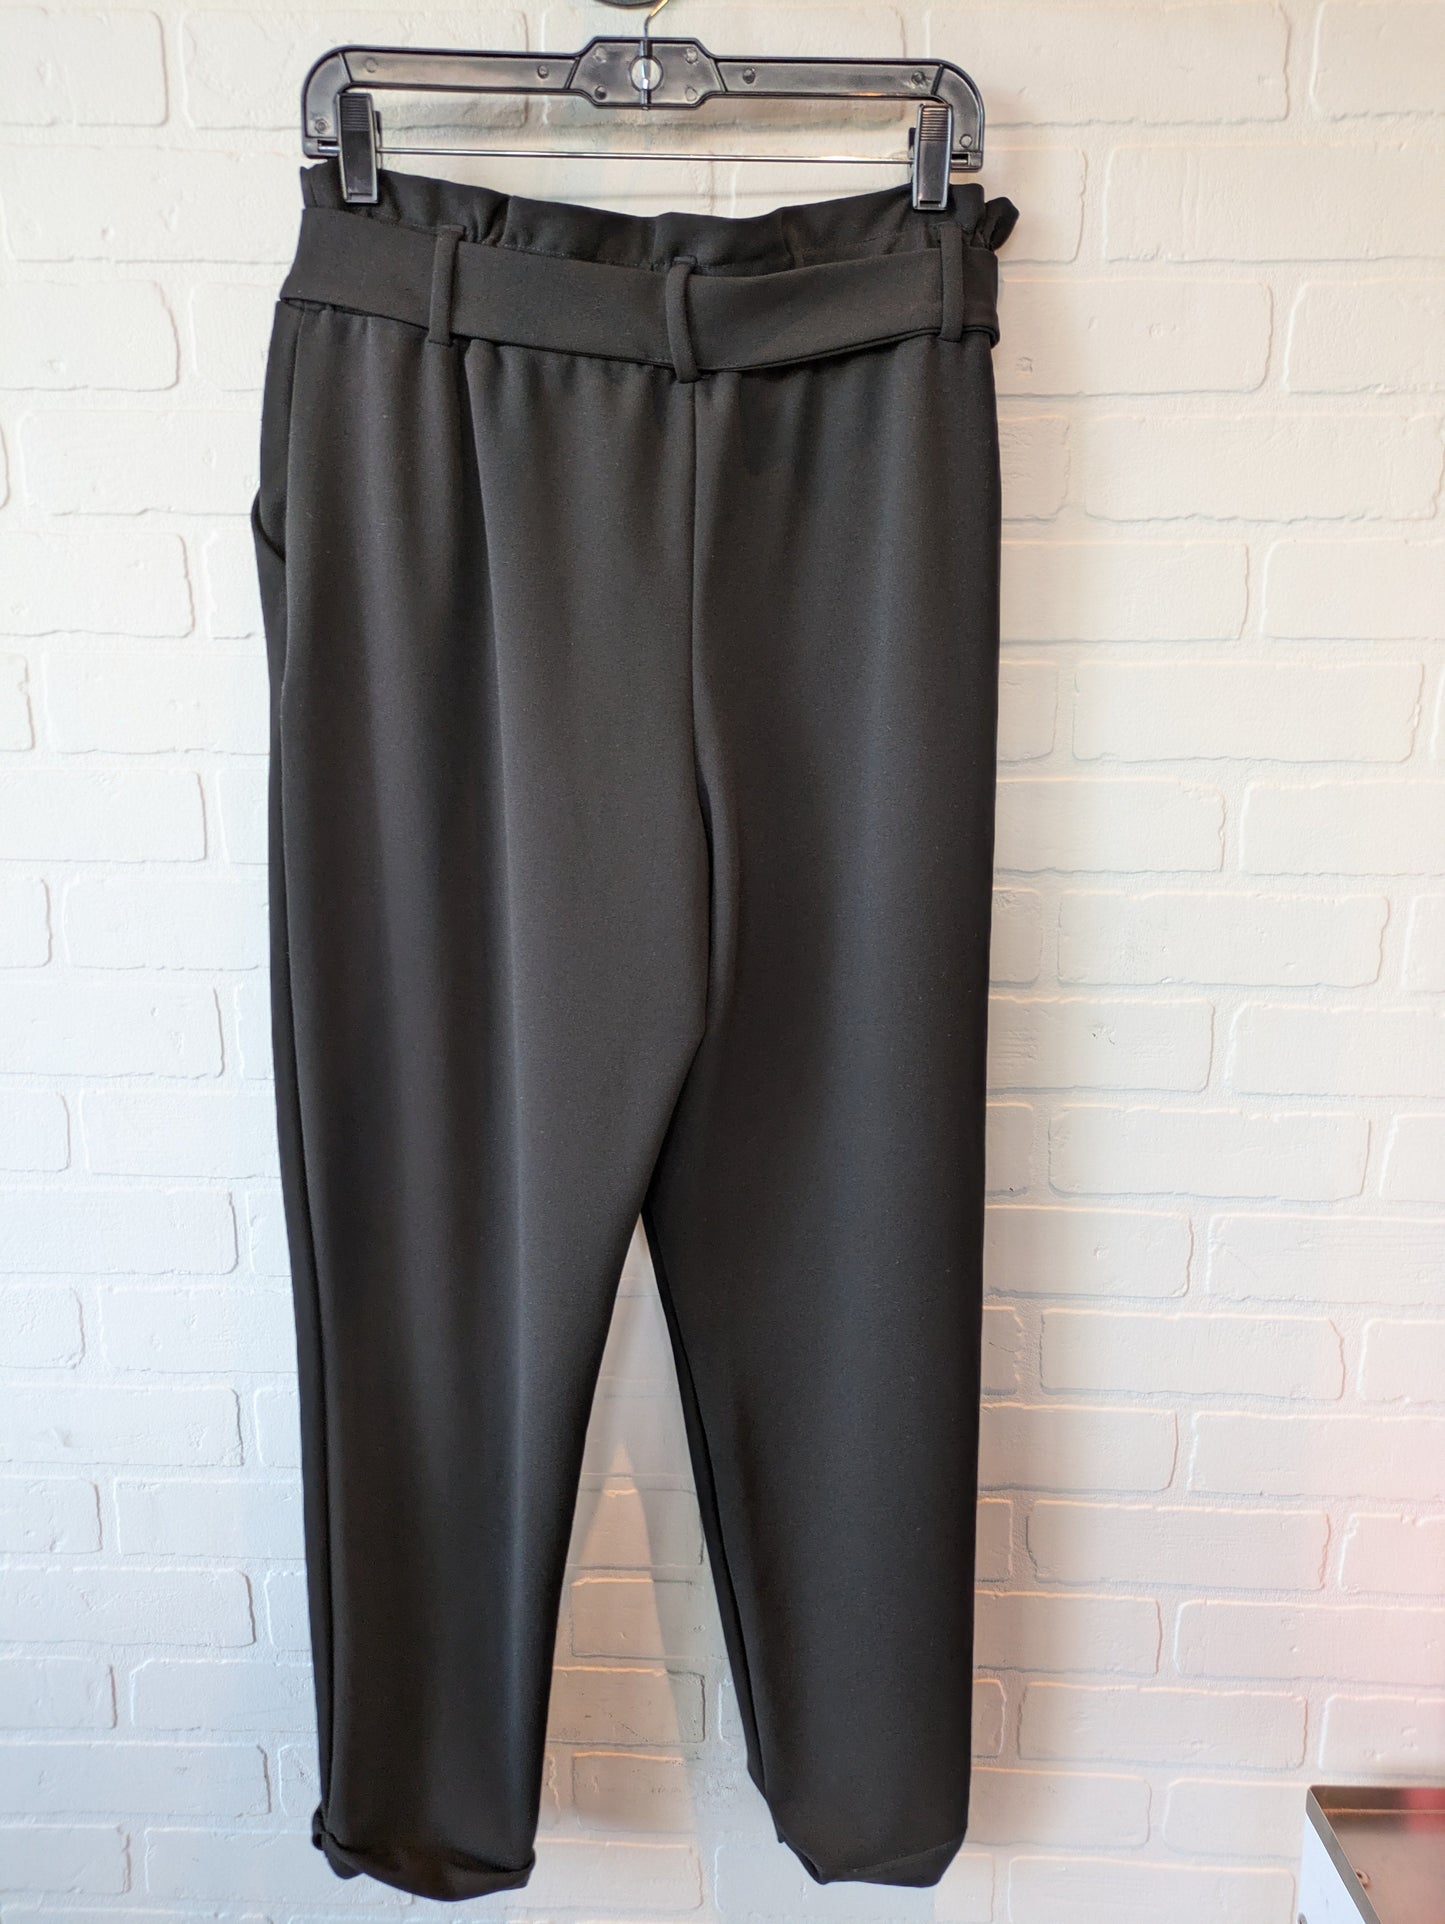 Black Pants Other Maurices, Size 8